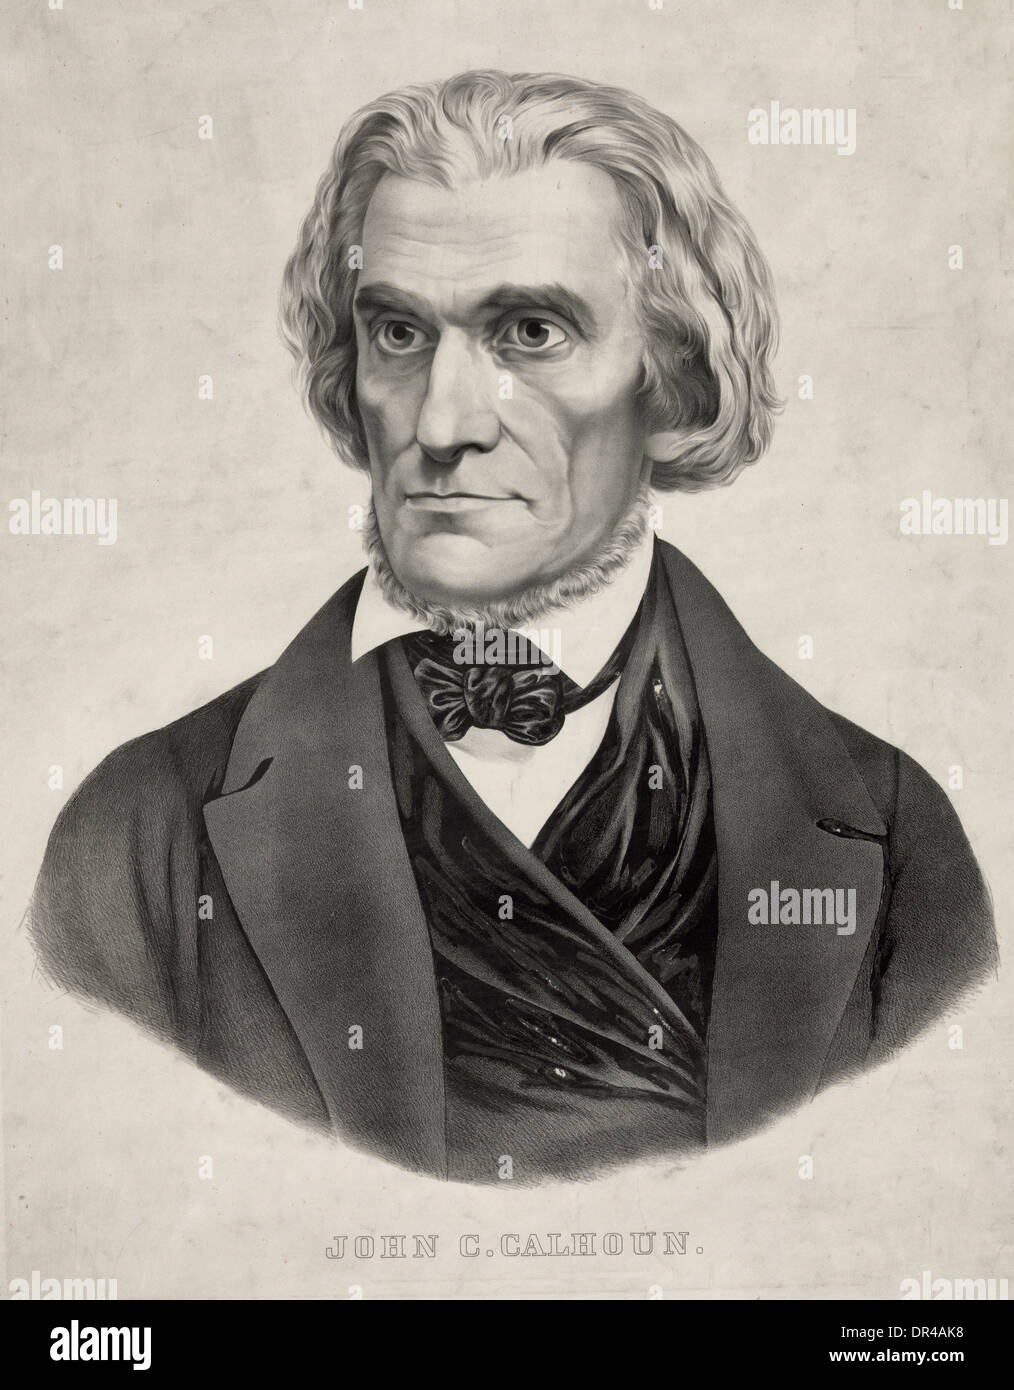 John Caldwell Calhoun was a leading American politician and political theorist during the first half of the 18th century. 1853 Stock Photo